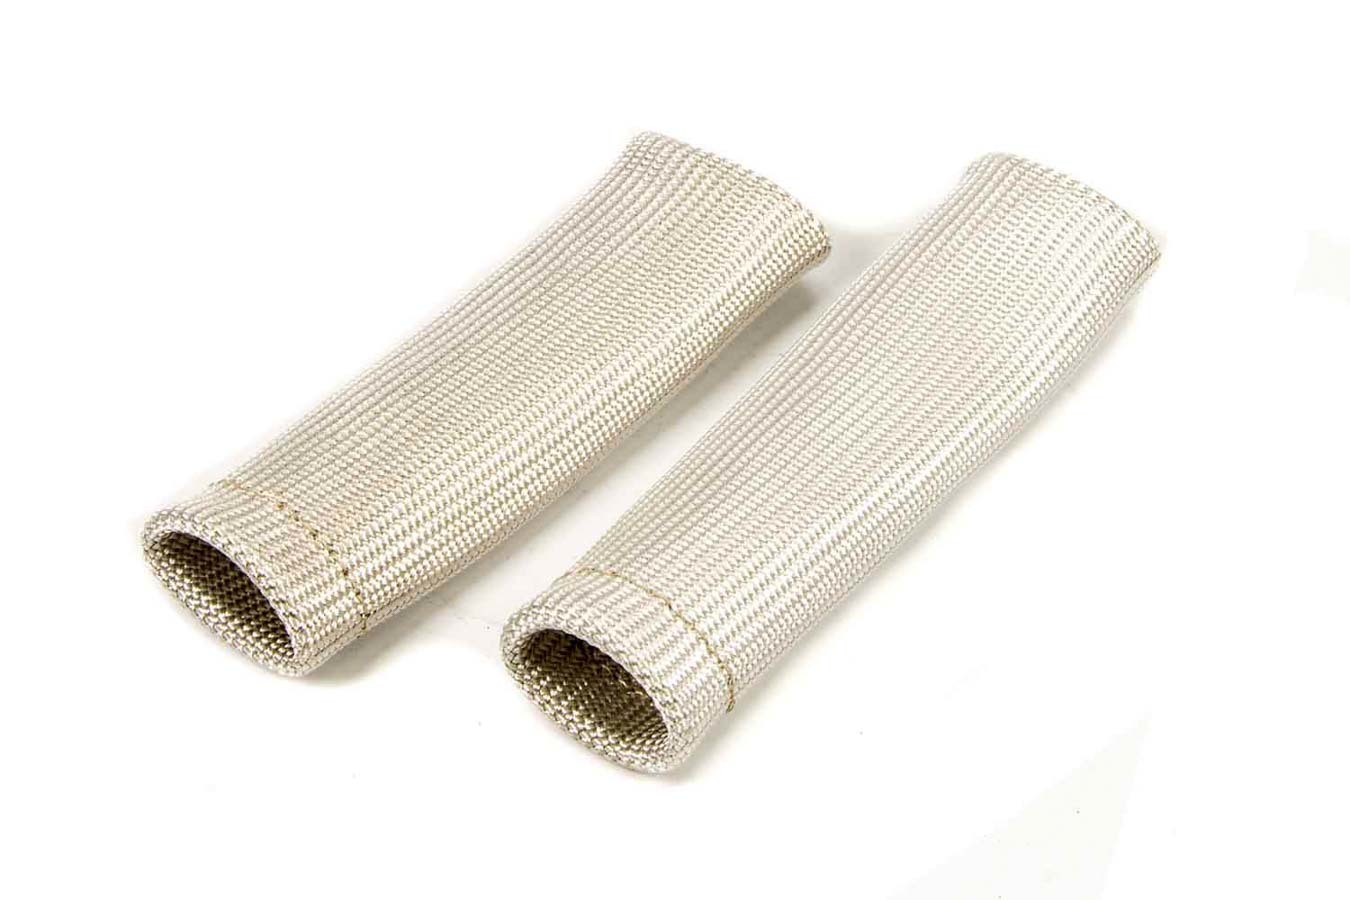 Pack of 2 Design Engineering 010551 Protect-A-Boots Angled Spark Plug Boot Protector Sleeves Silver